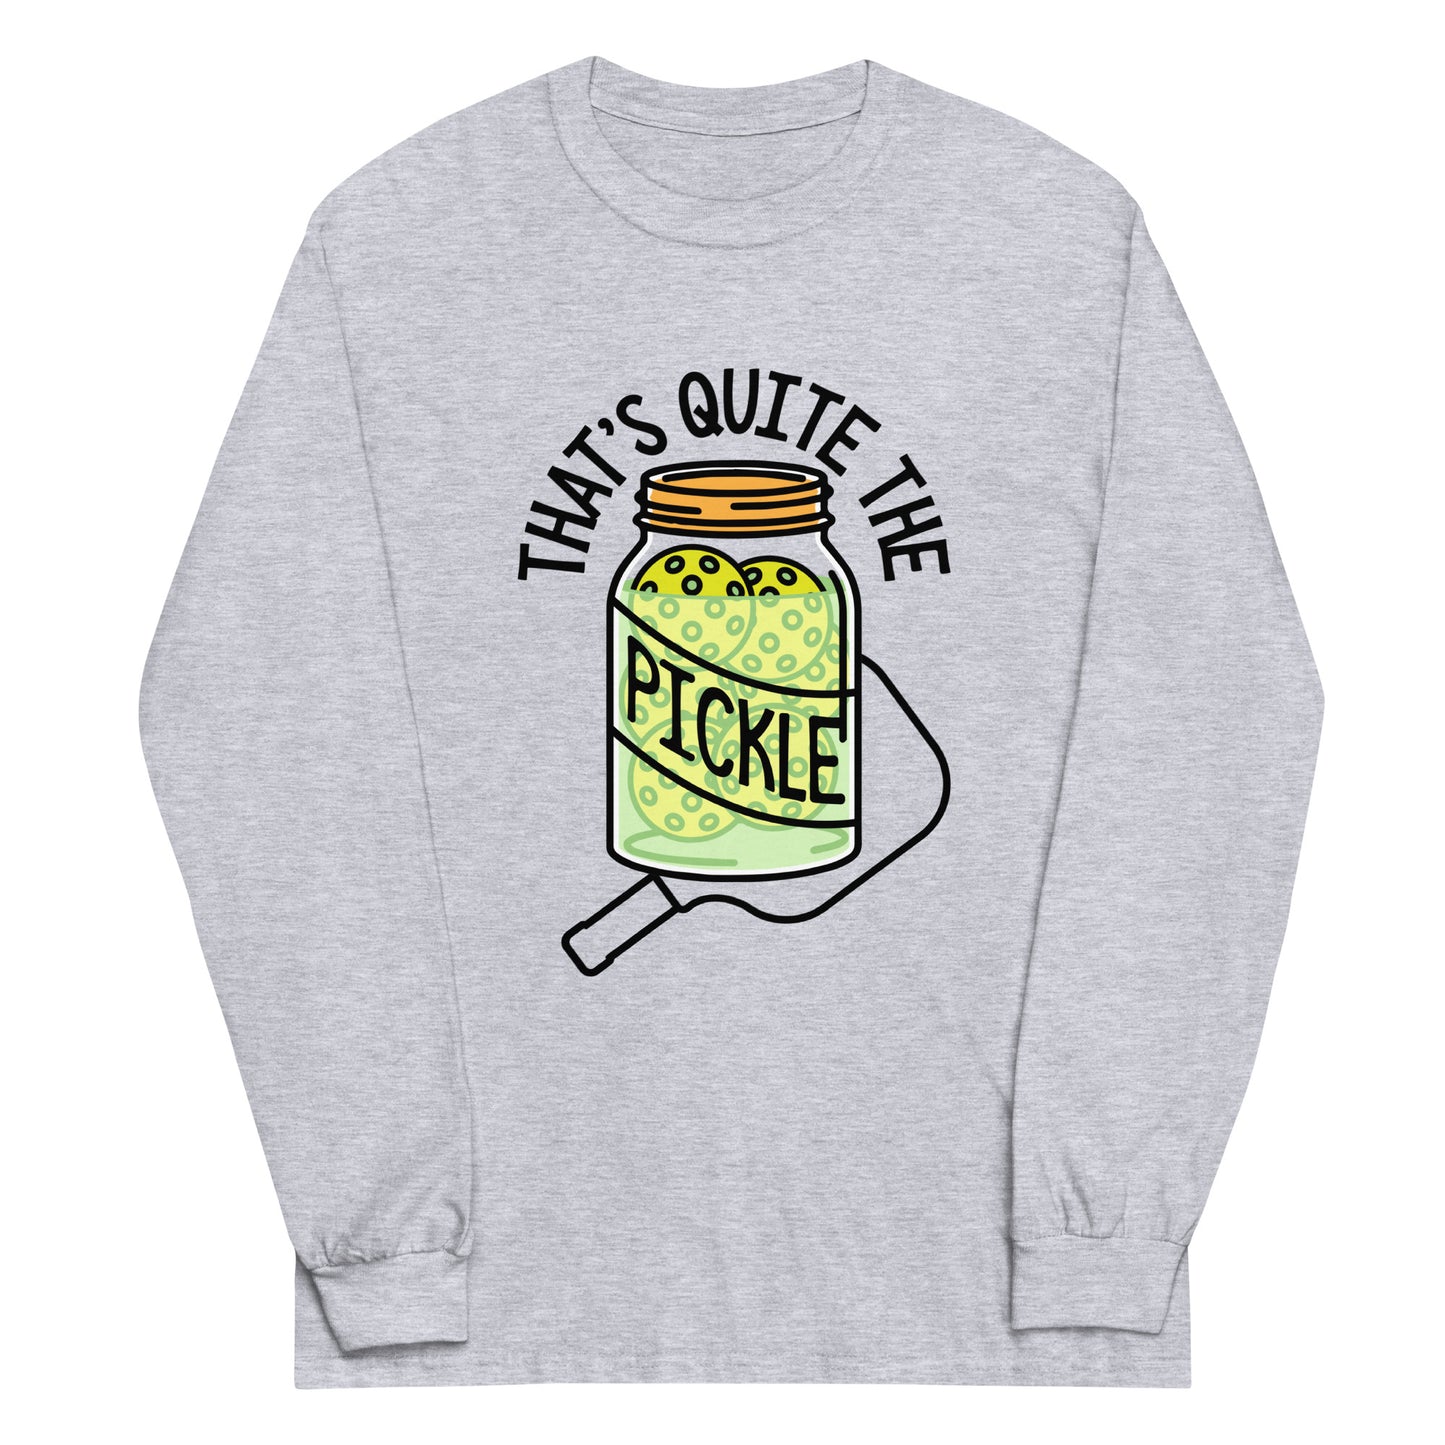 That's Quite The Pickle Unisex Long Sleeve Tee